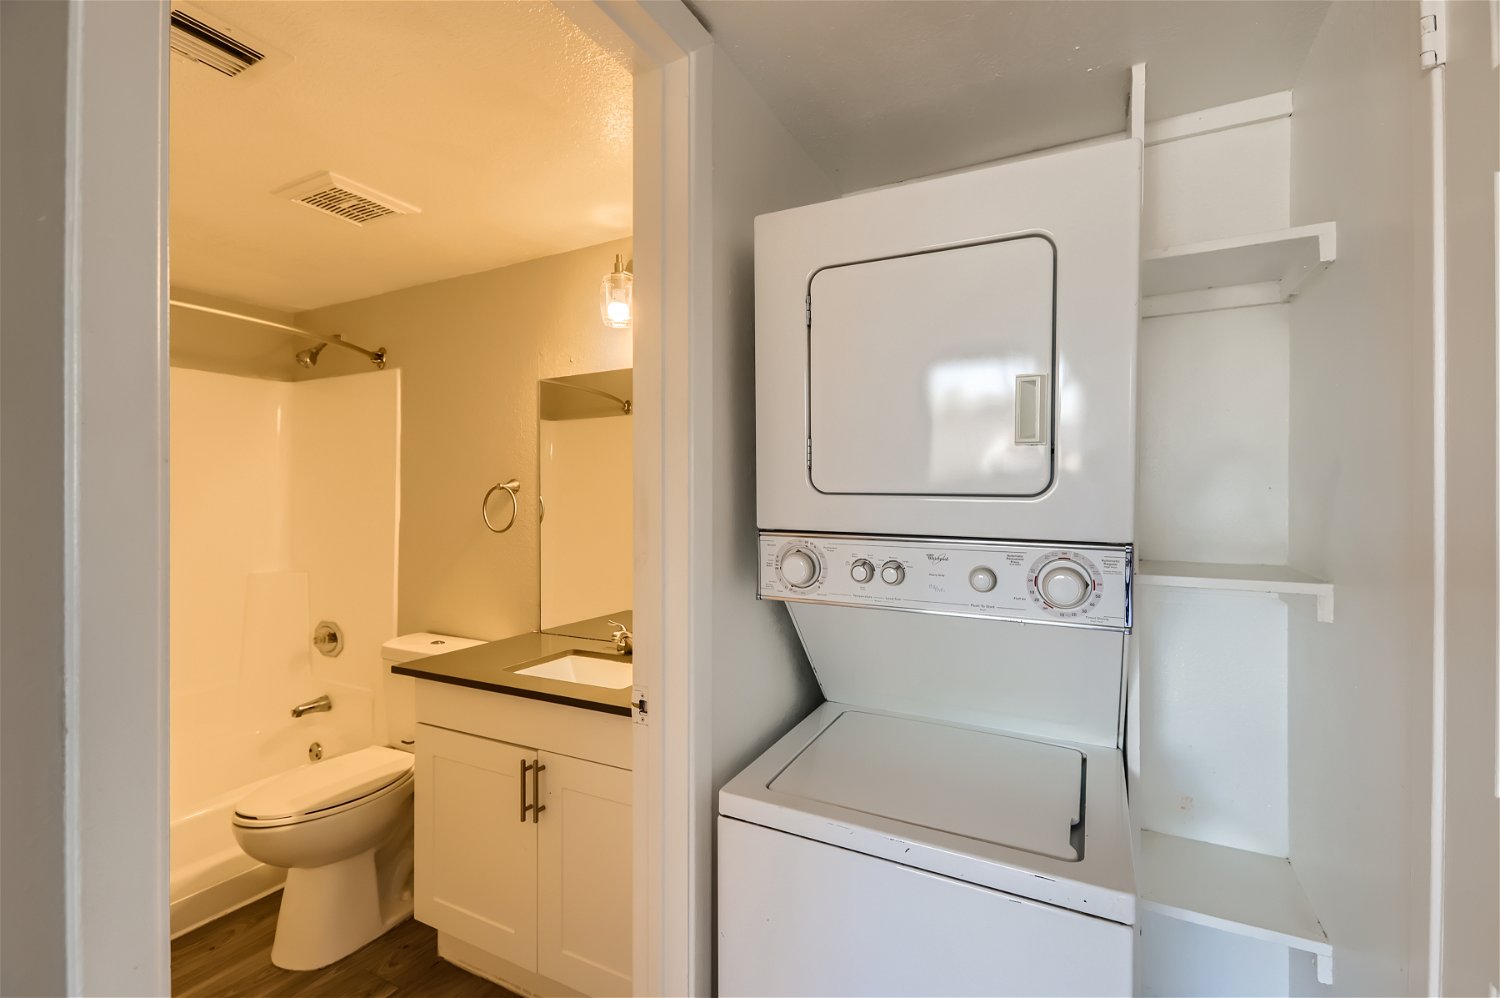 The bathroom with a washer and dryer in an enclave at Rise Trailside.